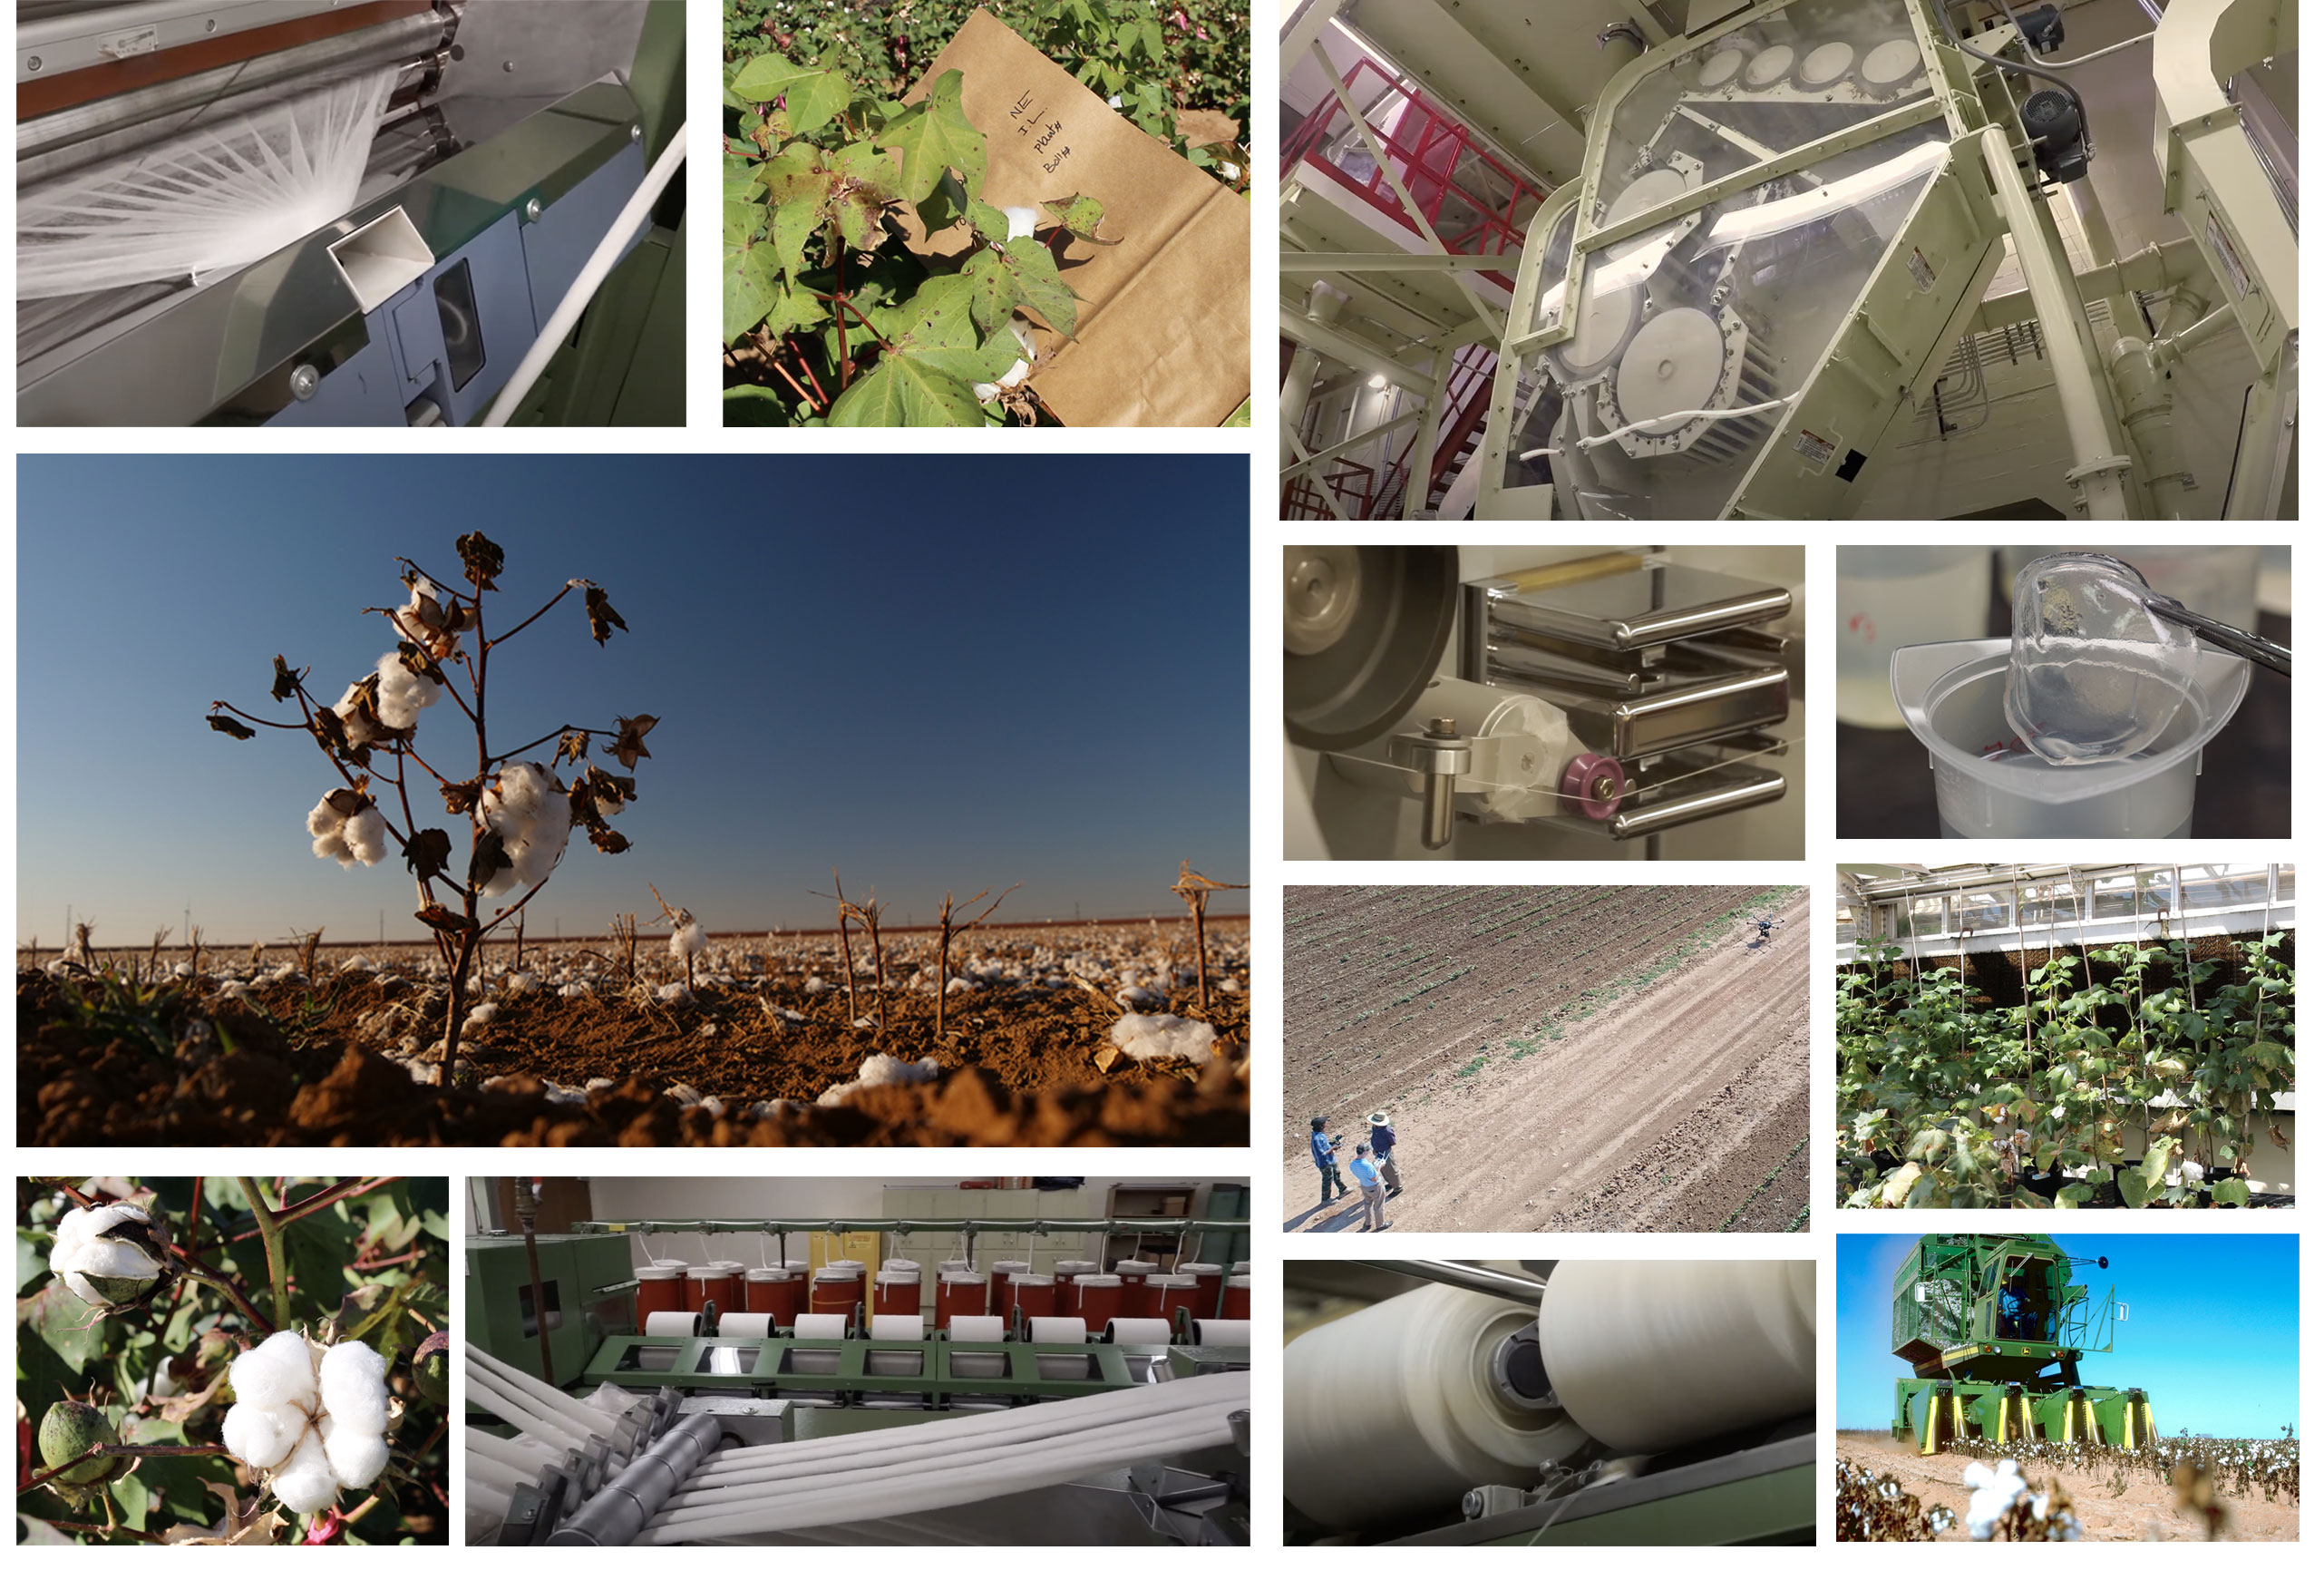 Texas Tech has researchers who work on cotton from the field to the fabric weaving process, all pictured here